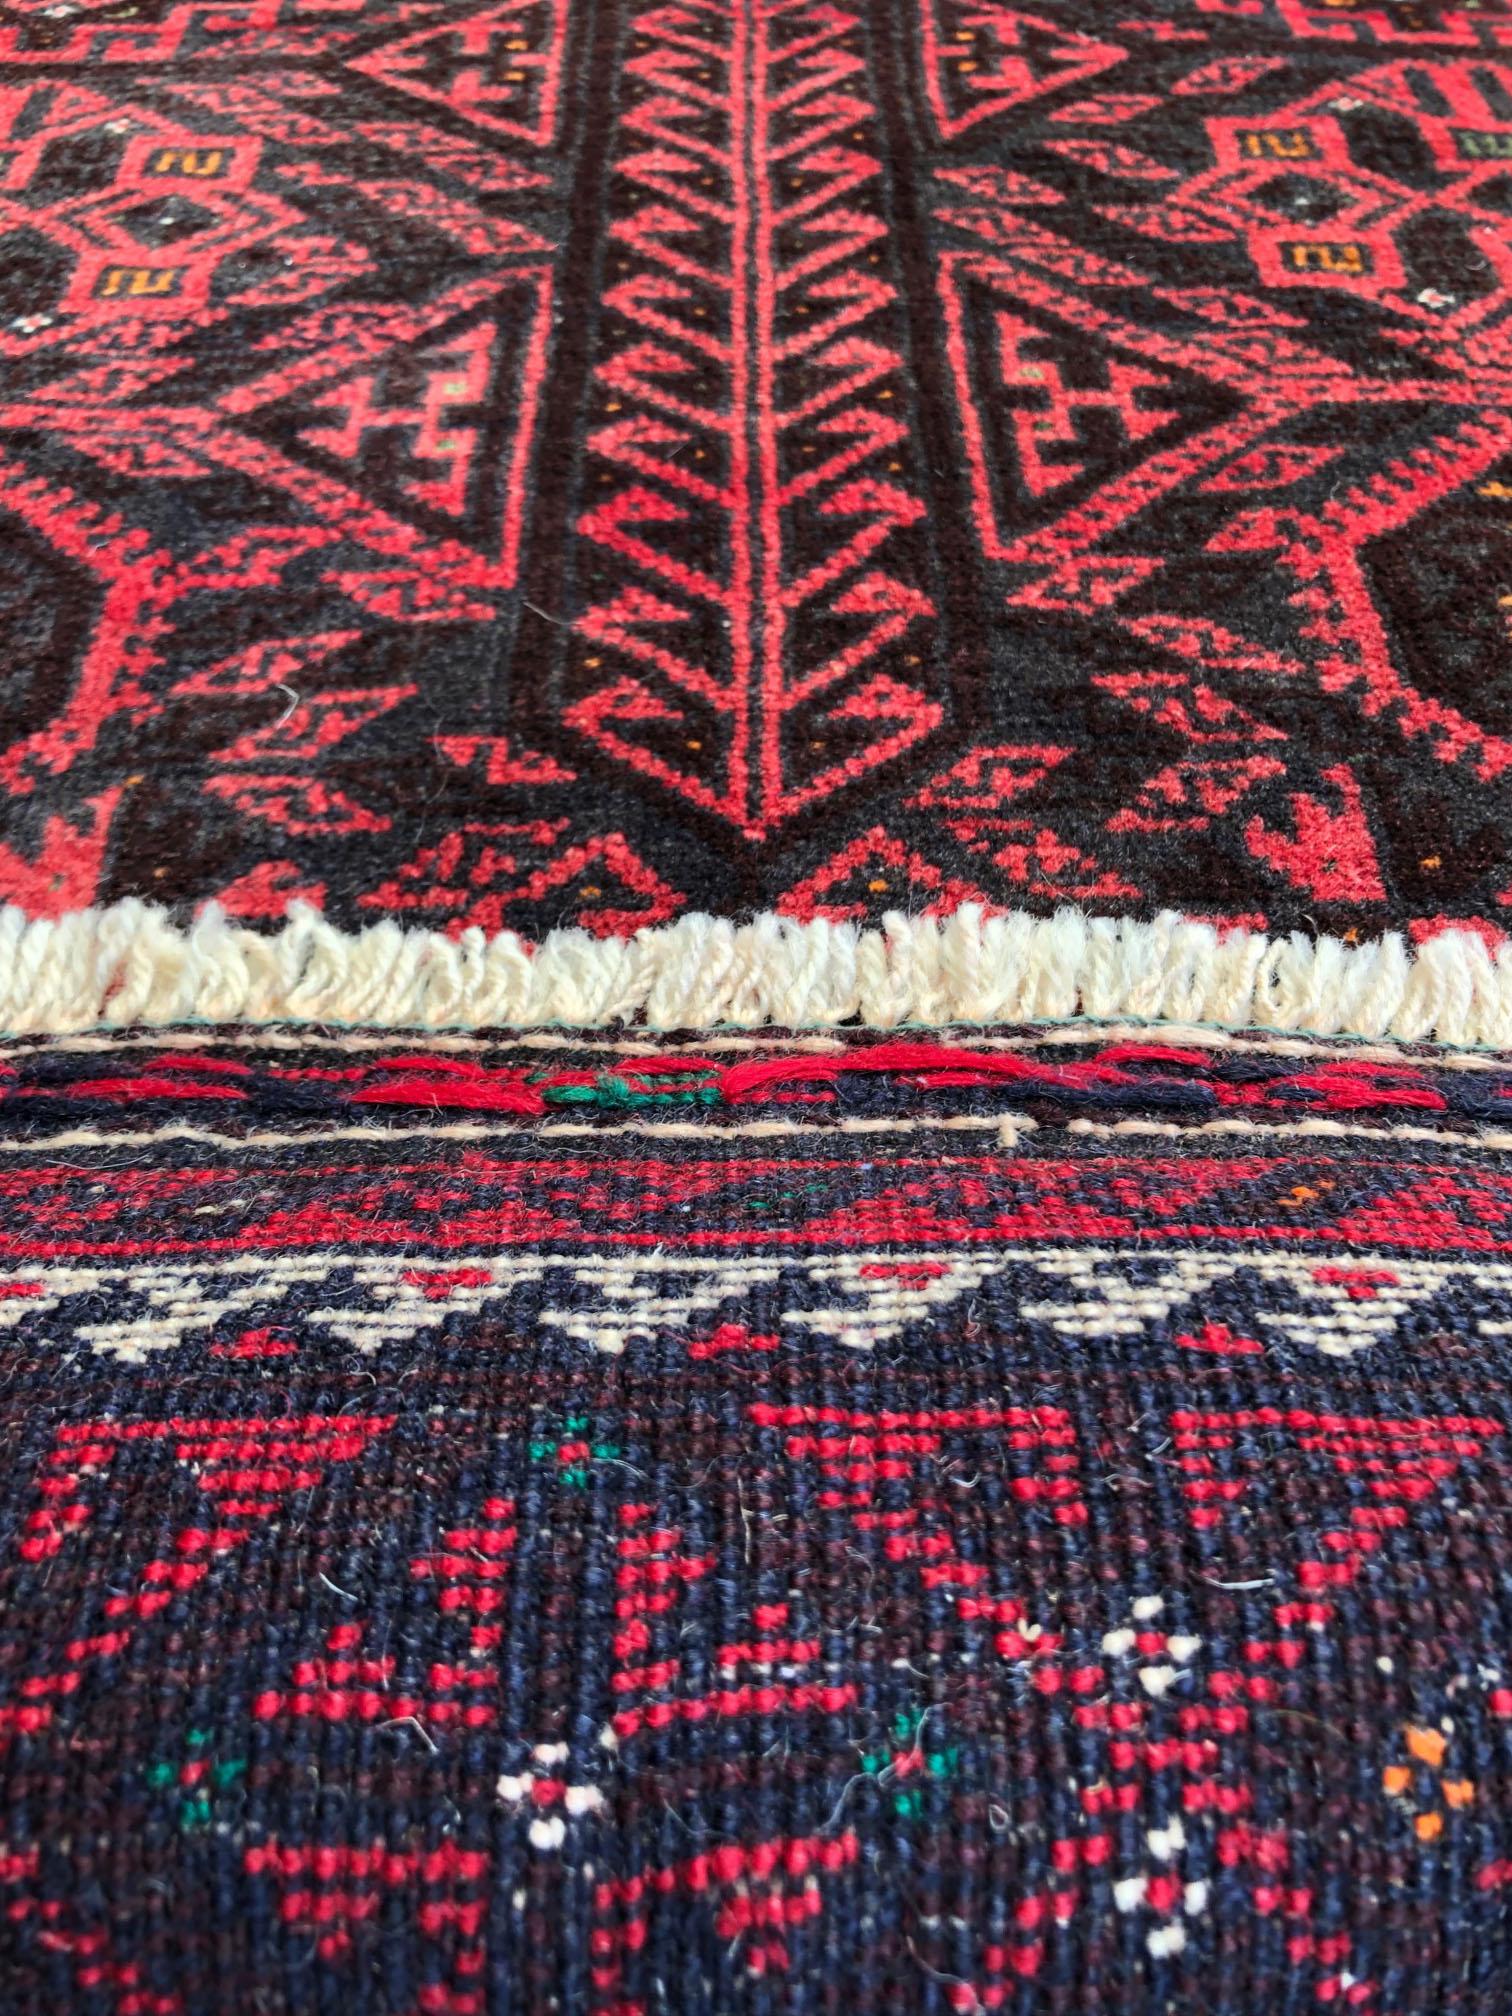 Authentic Persian Hand Knotted Geometric All-Over Red Black Baluchi Rug, 1960 For Sale 4